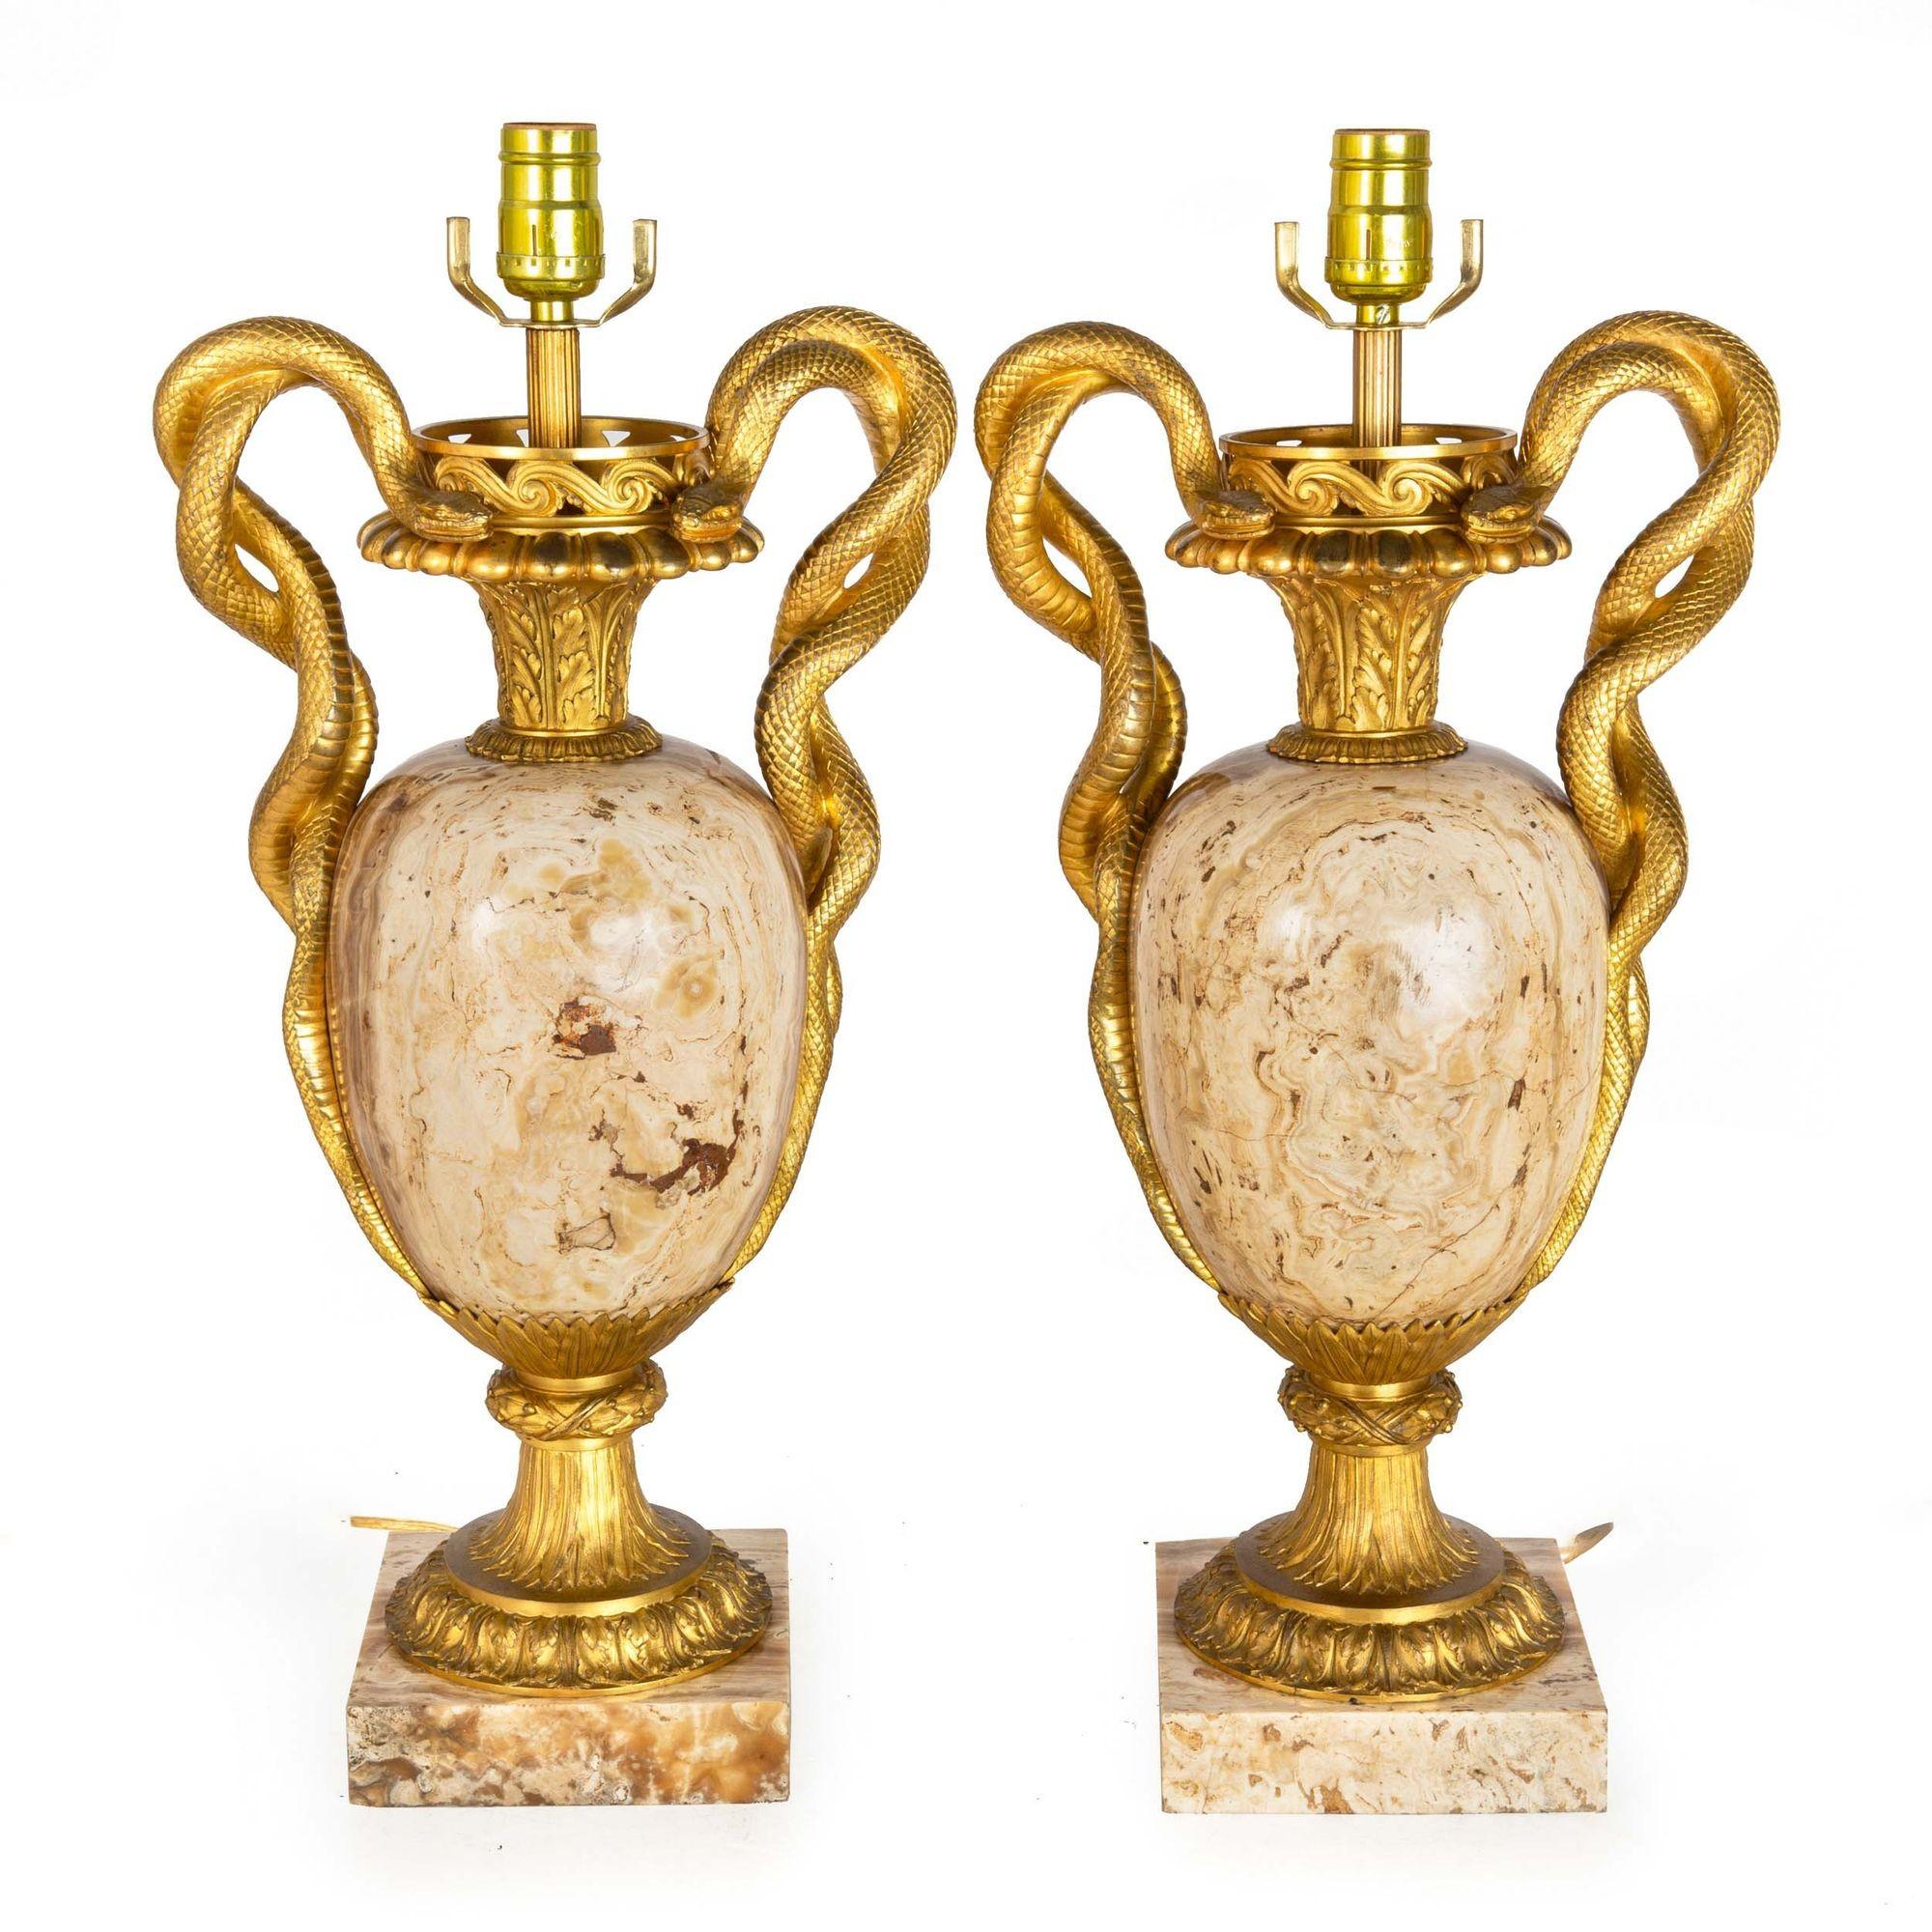 AN EXCEEDINGLY FINE PAIR OF LOUIS XVI STYLE VASIFORM LAMPS WITH ONYX SURMOUNTED BY INTRICATELY CAST GILT-BRONZE ENTWINED SNAKE HANDLES
France, circa 1870
Item # 307JUX13W 

A truly stunning pair of vasiform lamps in the Louis XVI taste, they feature